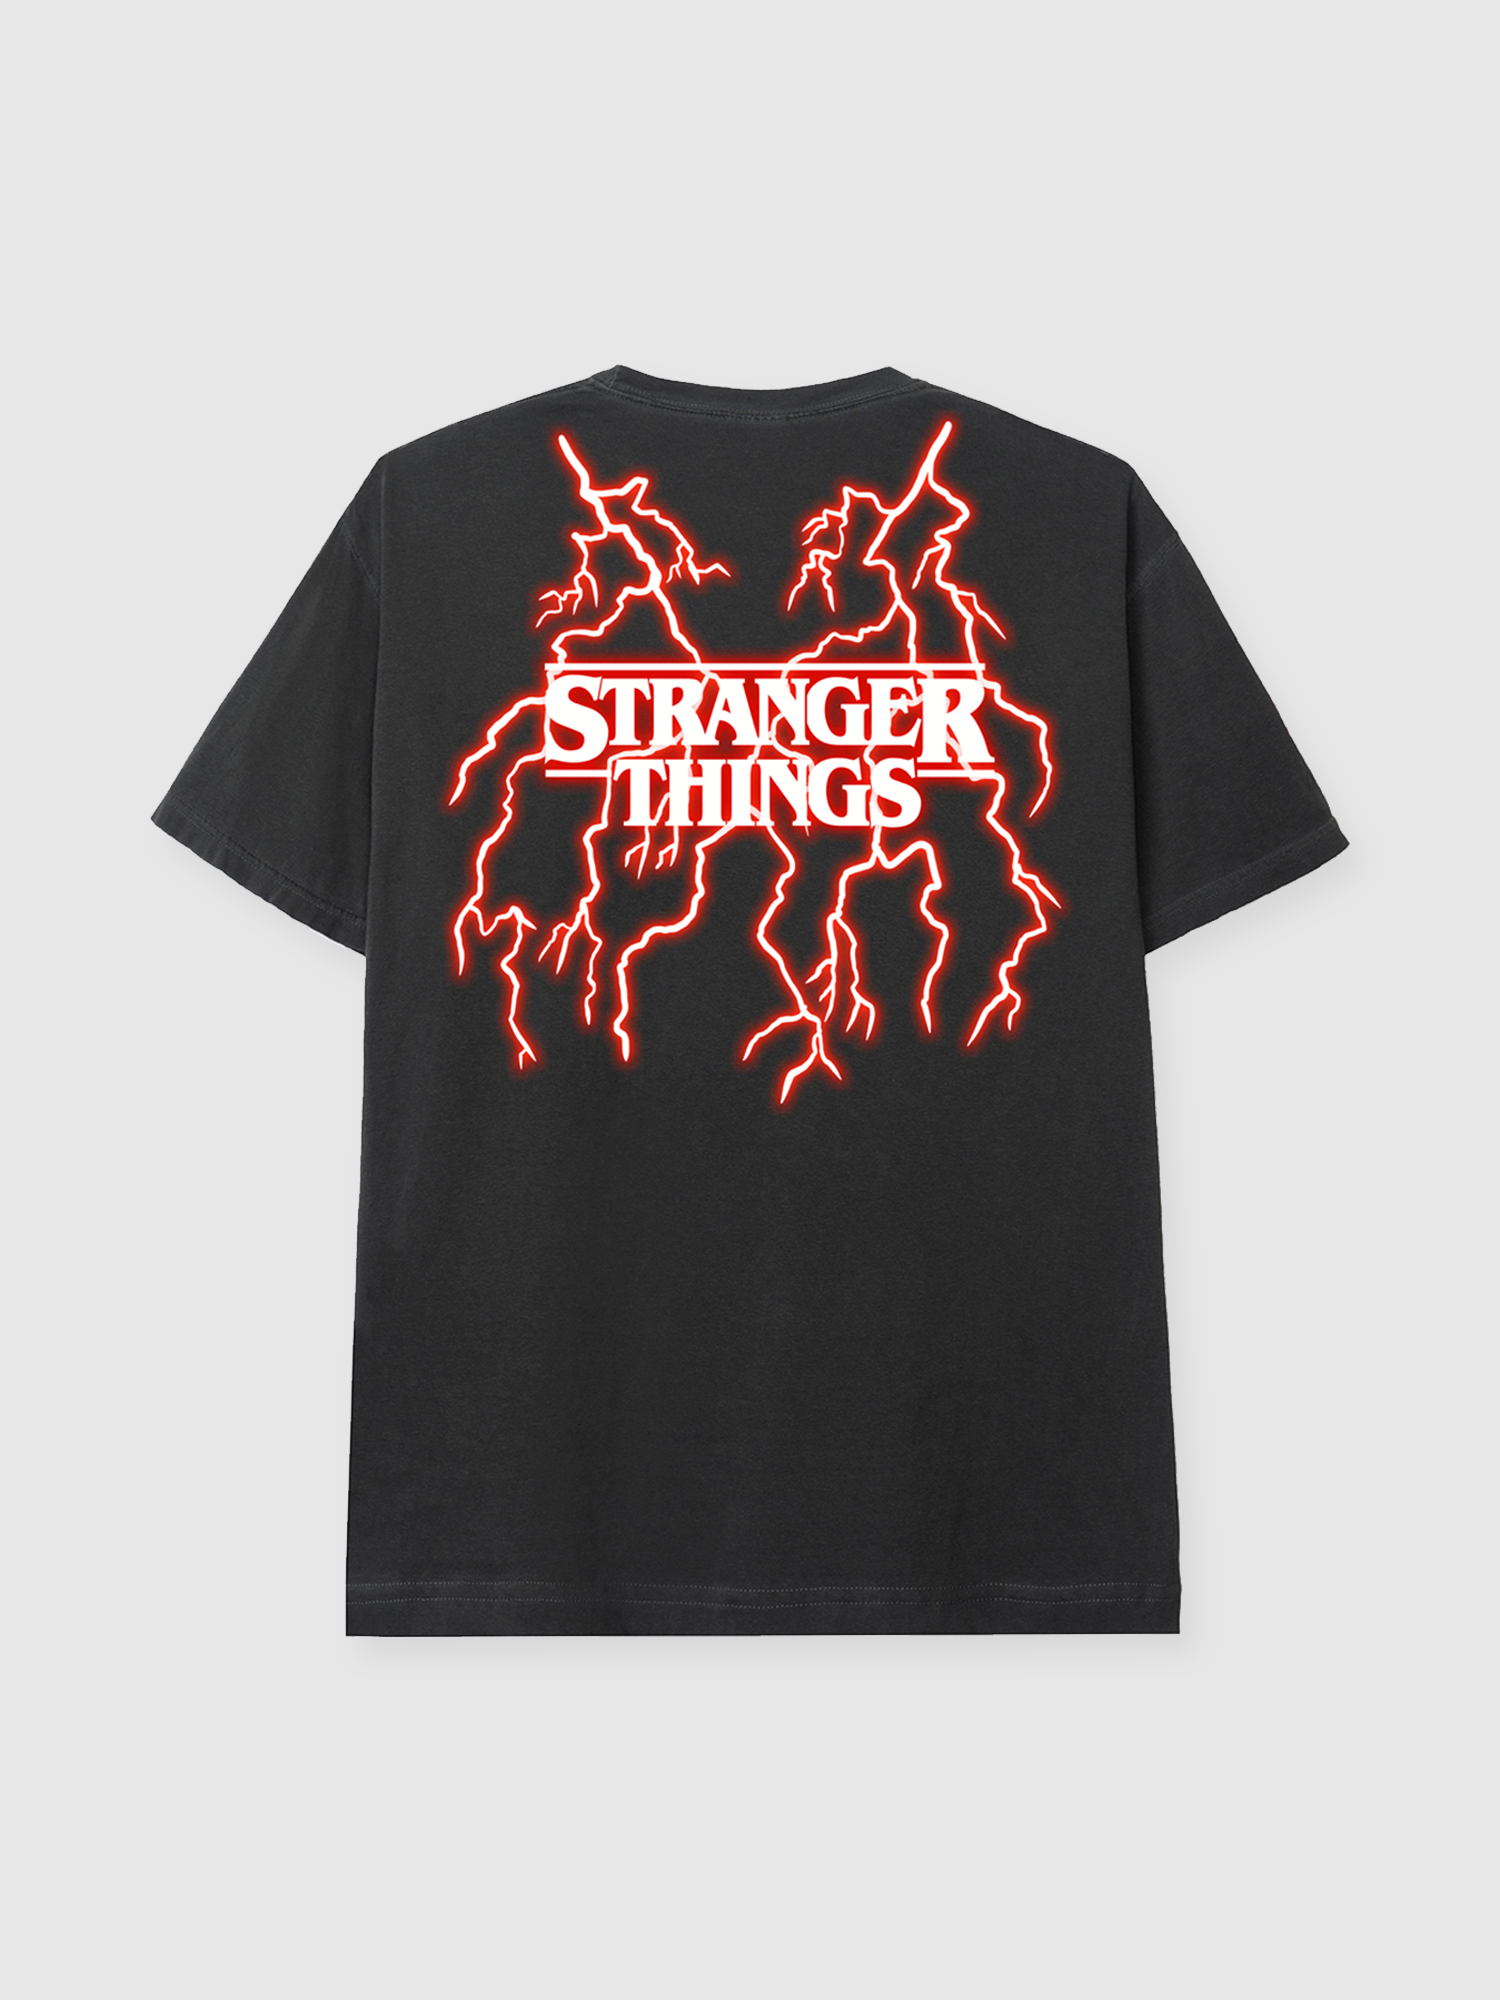 Free Roblox T-shirt Black and red preppy stranger things theme 🎸📼